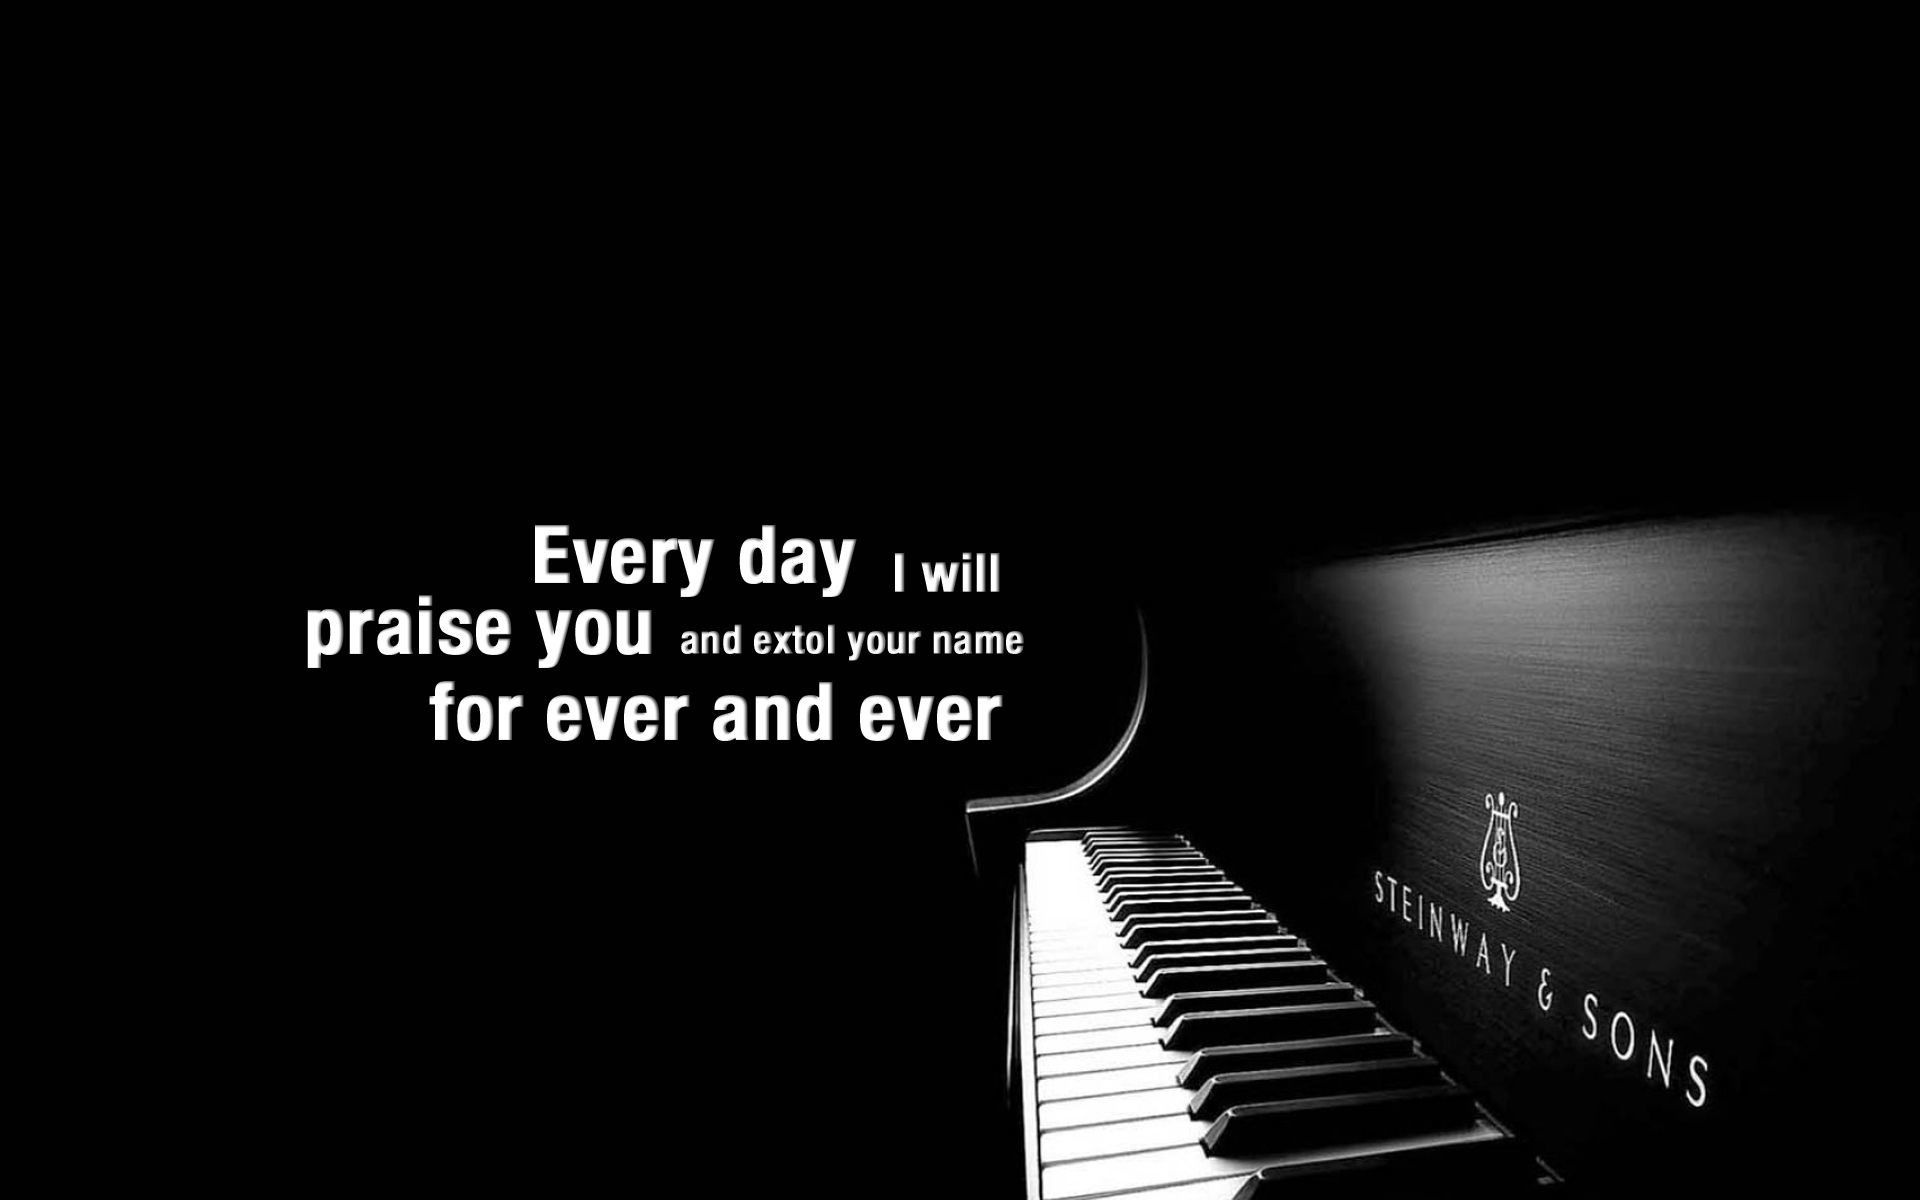 Gospel Music: Black and white, Piano music, Religious message, Musical instrument. 1920x1200 HD Wallpaper.